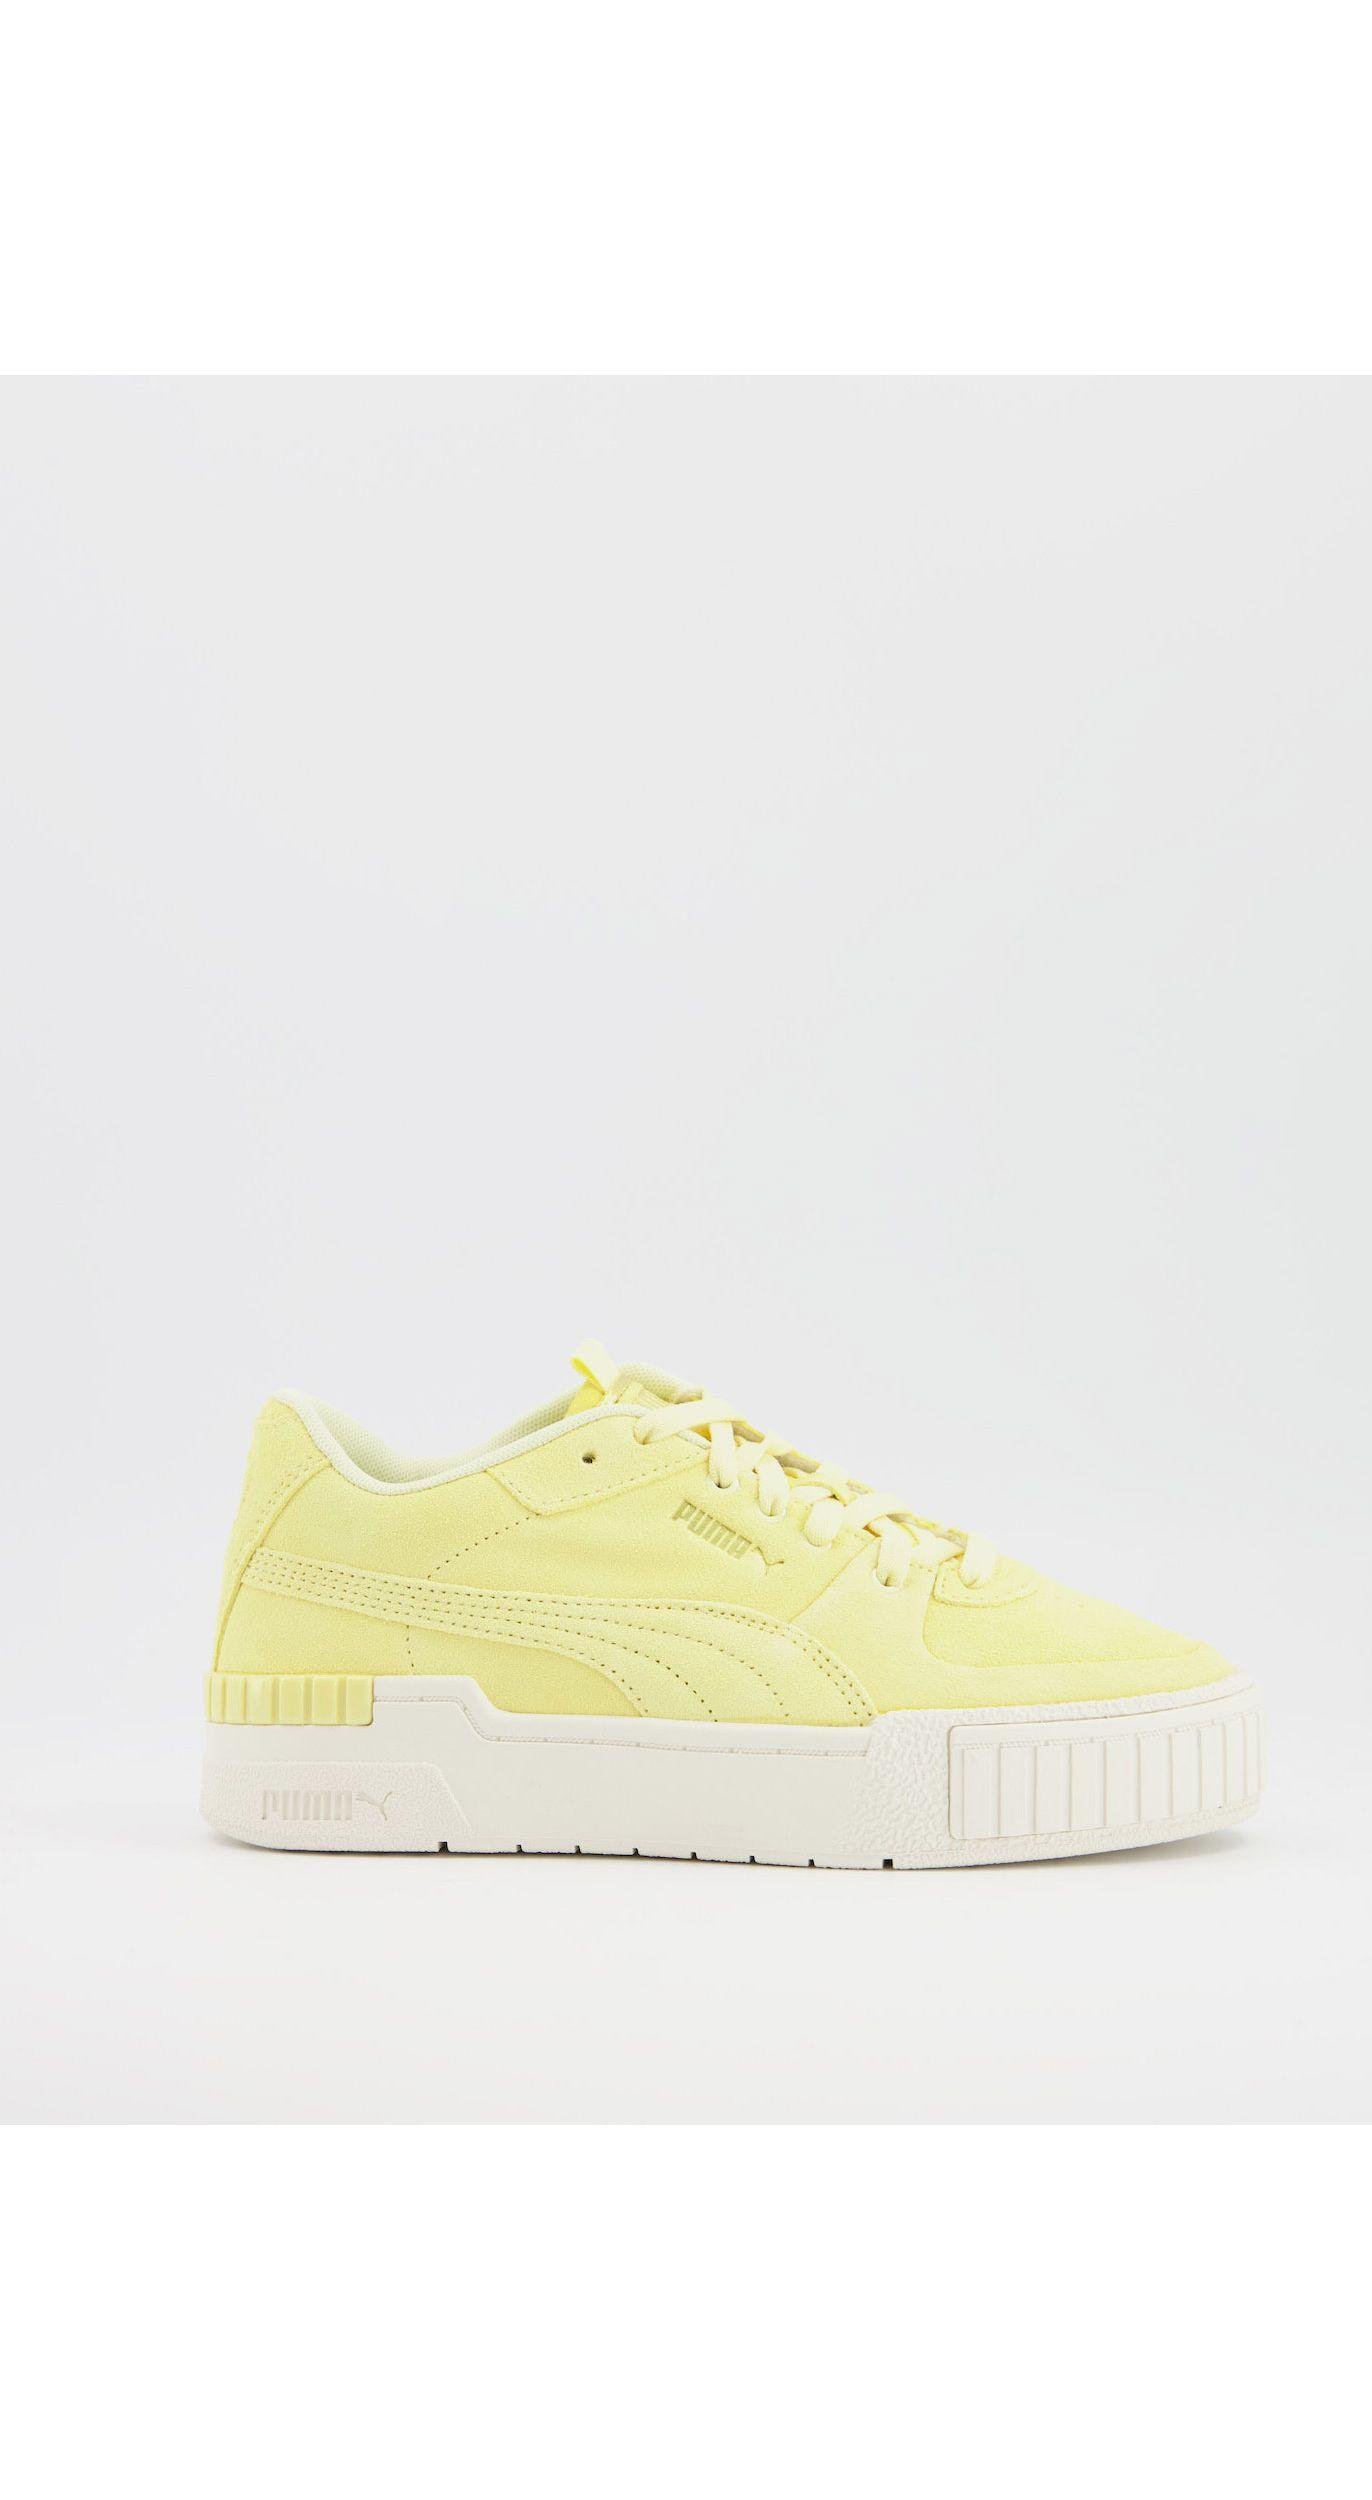 PUMA Cali Suede Gum Sole Trainers in Pastel Yellow (Yellow) | Lyst Australia